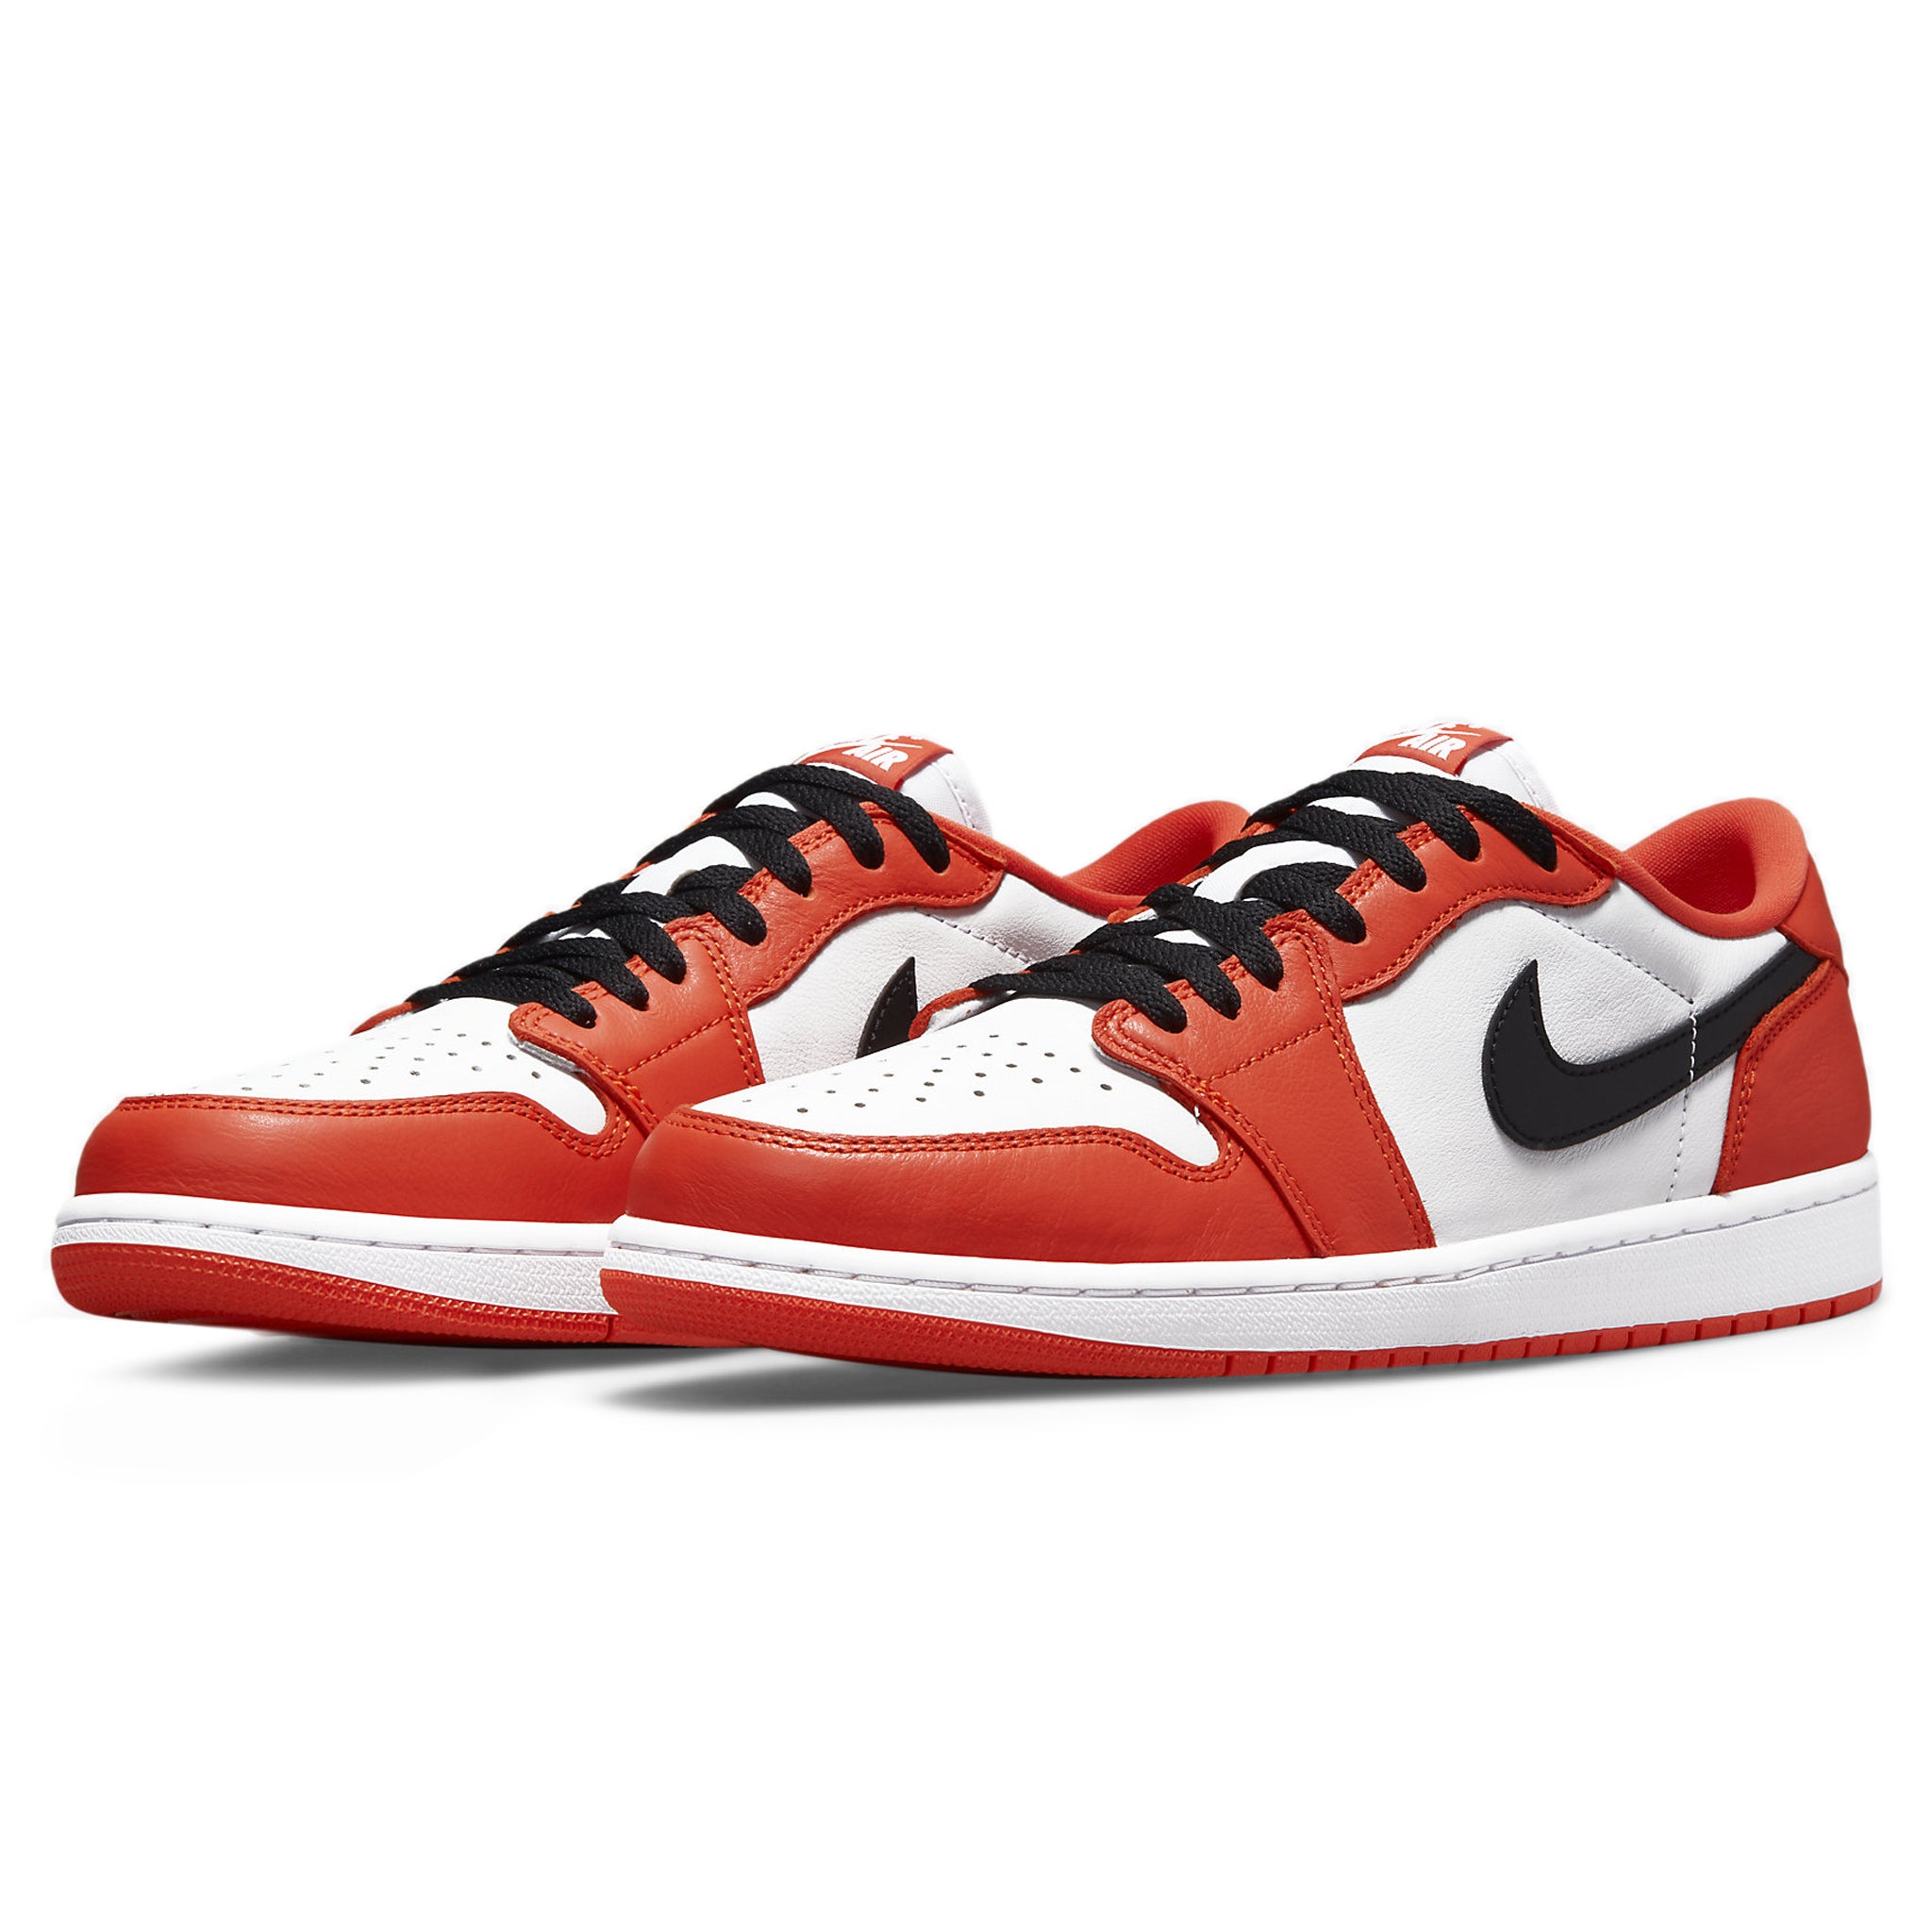 Front side view of Air Jordan 1 Low Starfish (Shattered Backboard) CZ0790-801